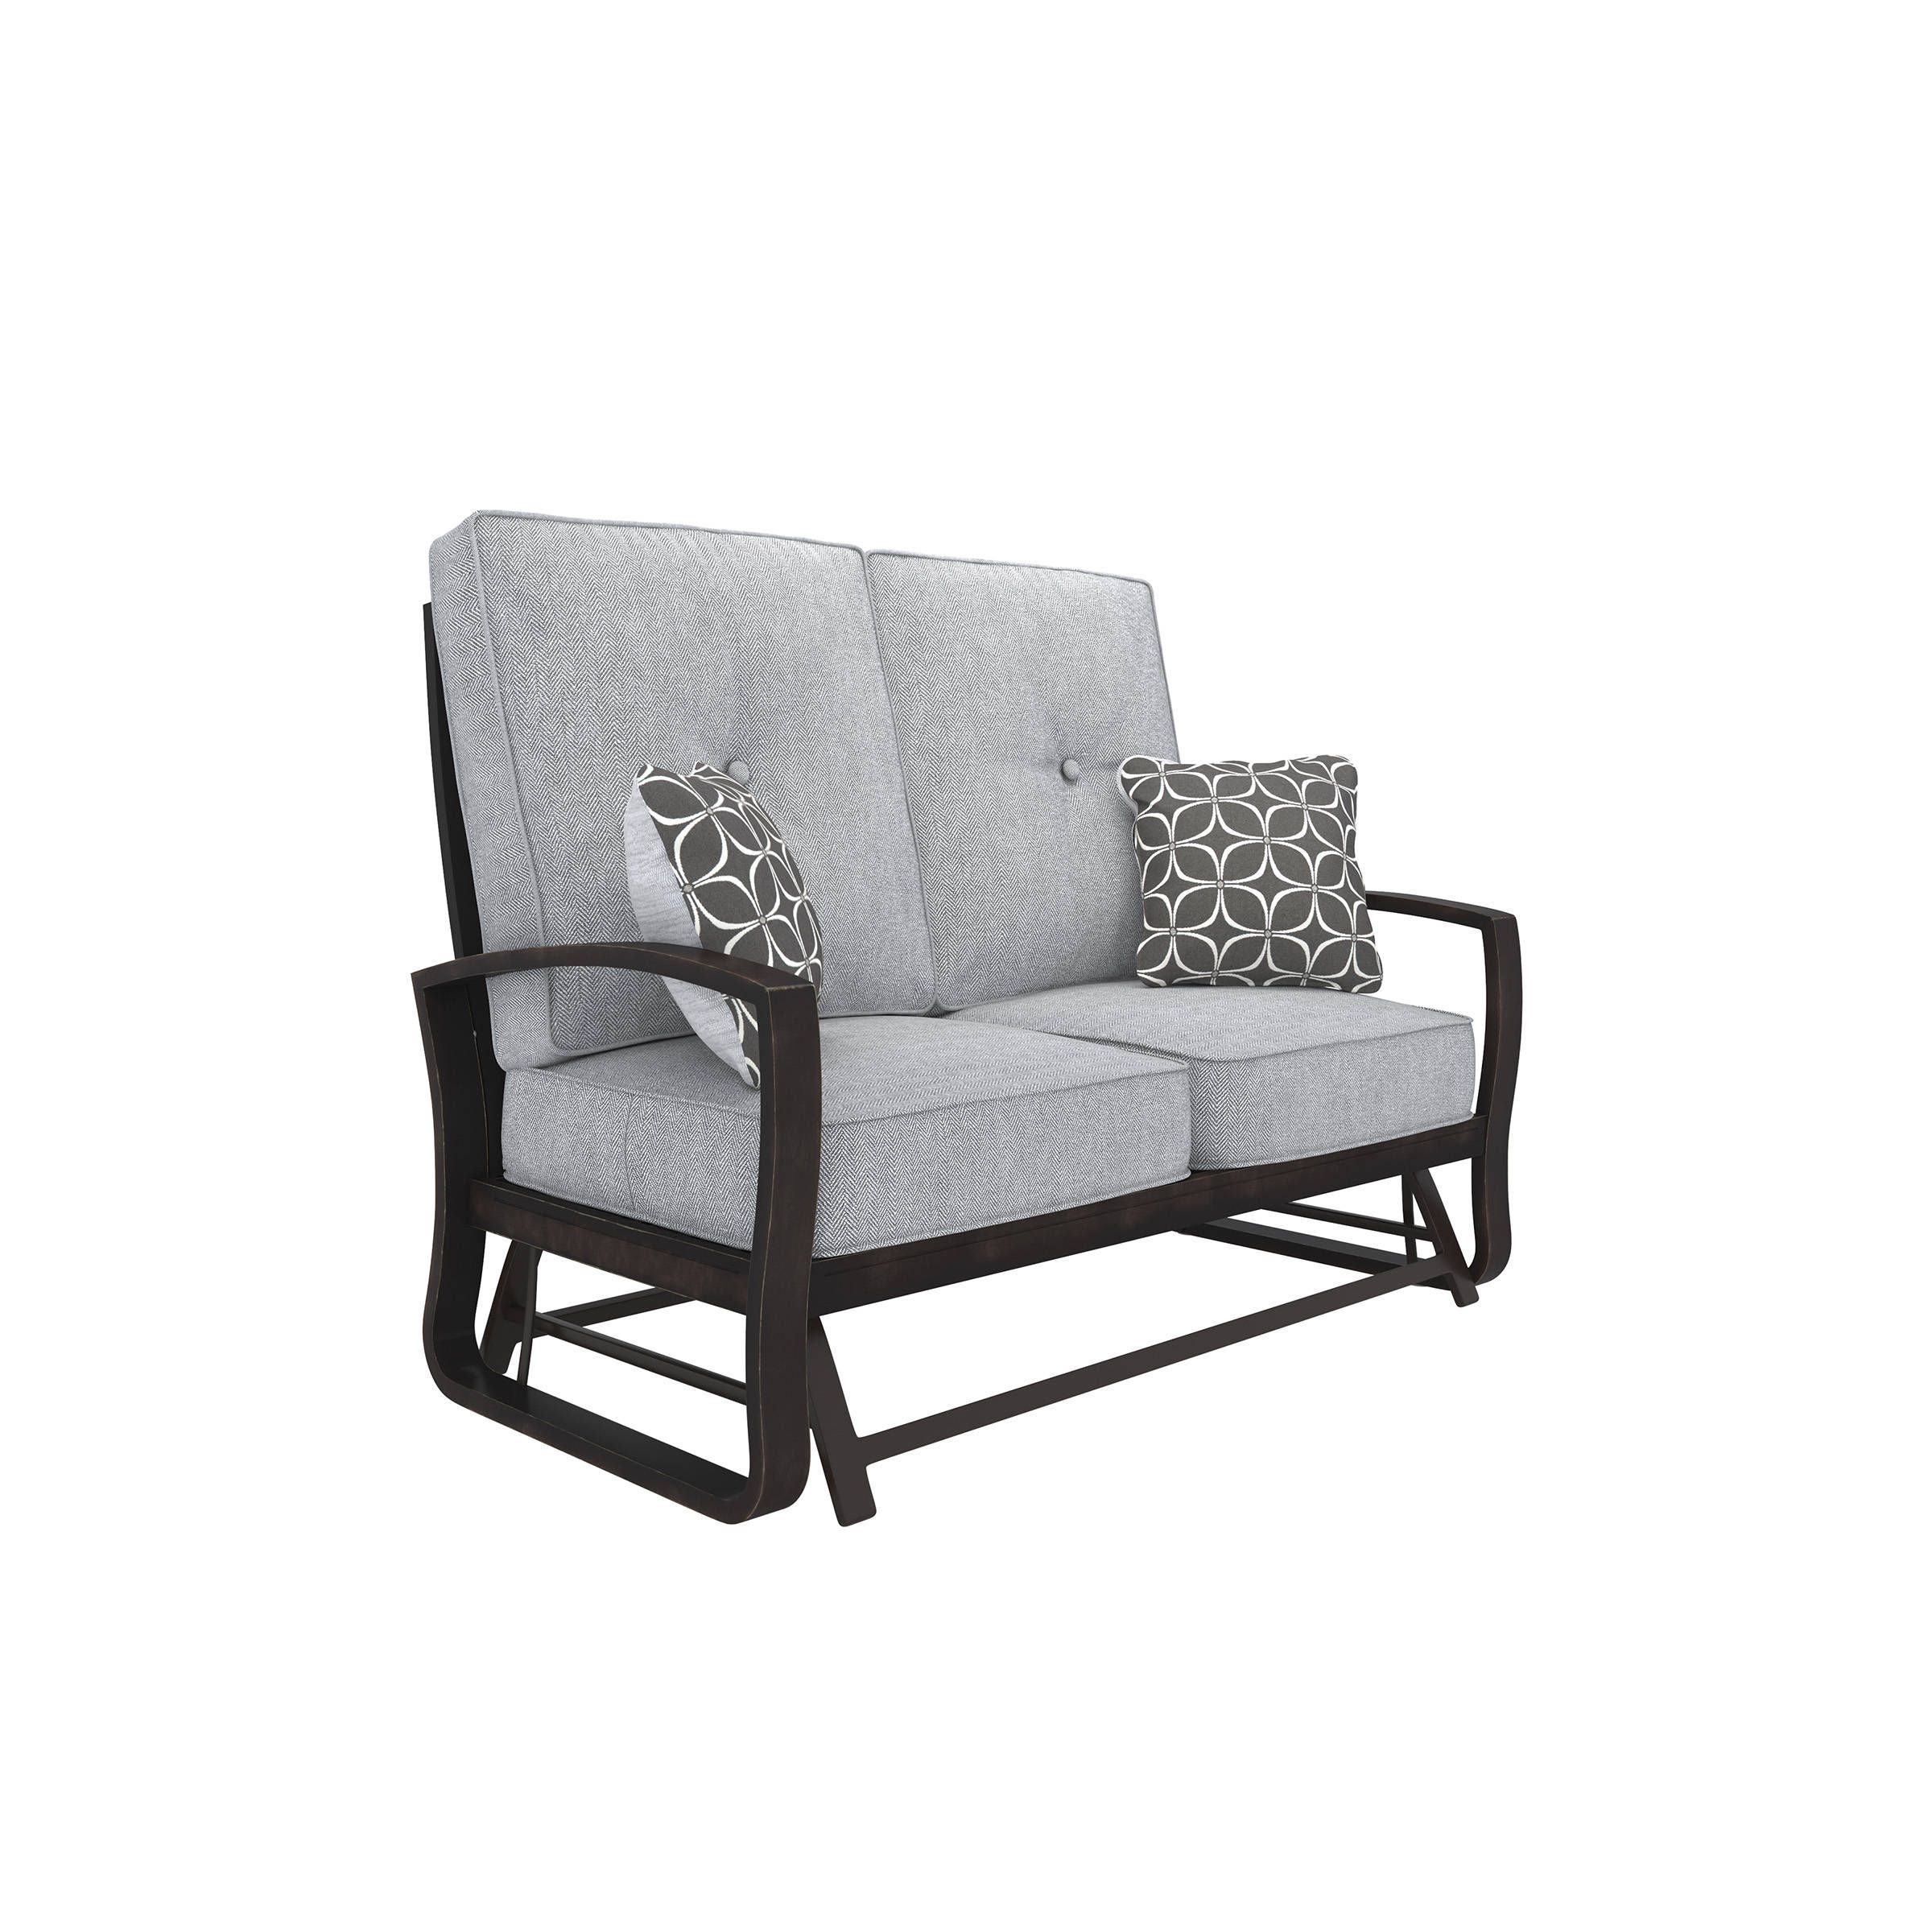 Ashley Furniture Castle Island Cushion Glider Loveseat | The Regarding Cushioned Glider Benches With Cushions (Photo 9 of 27)